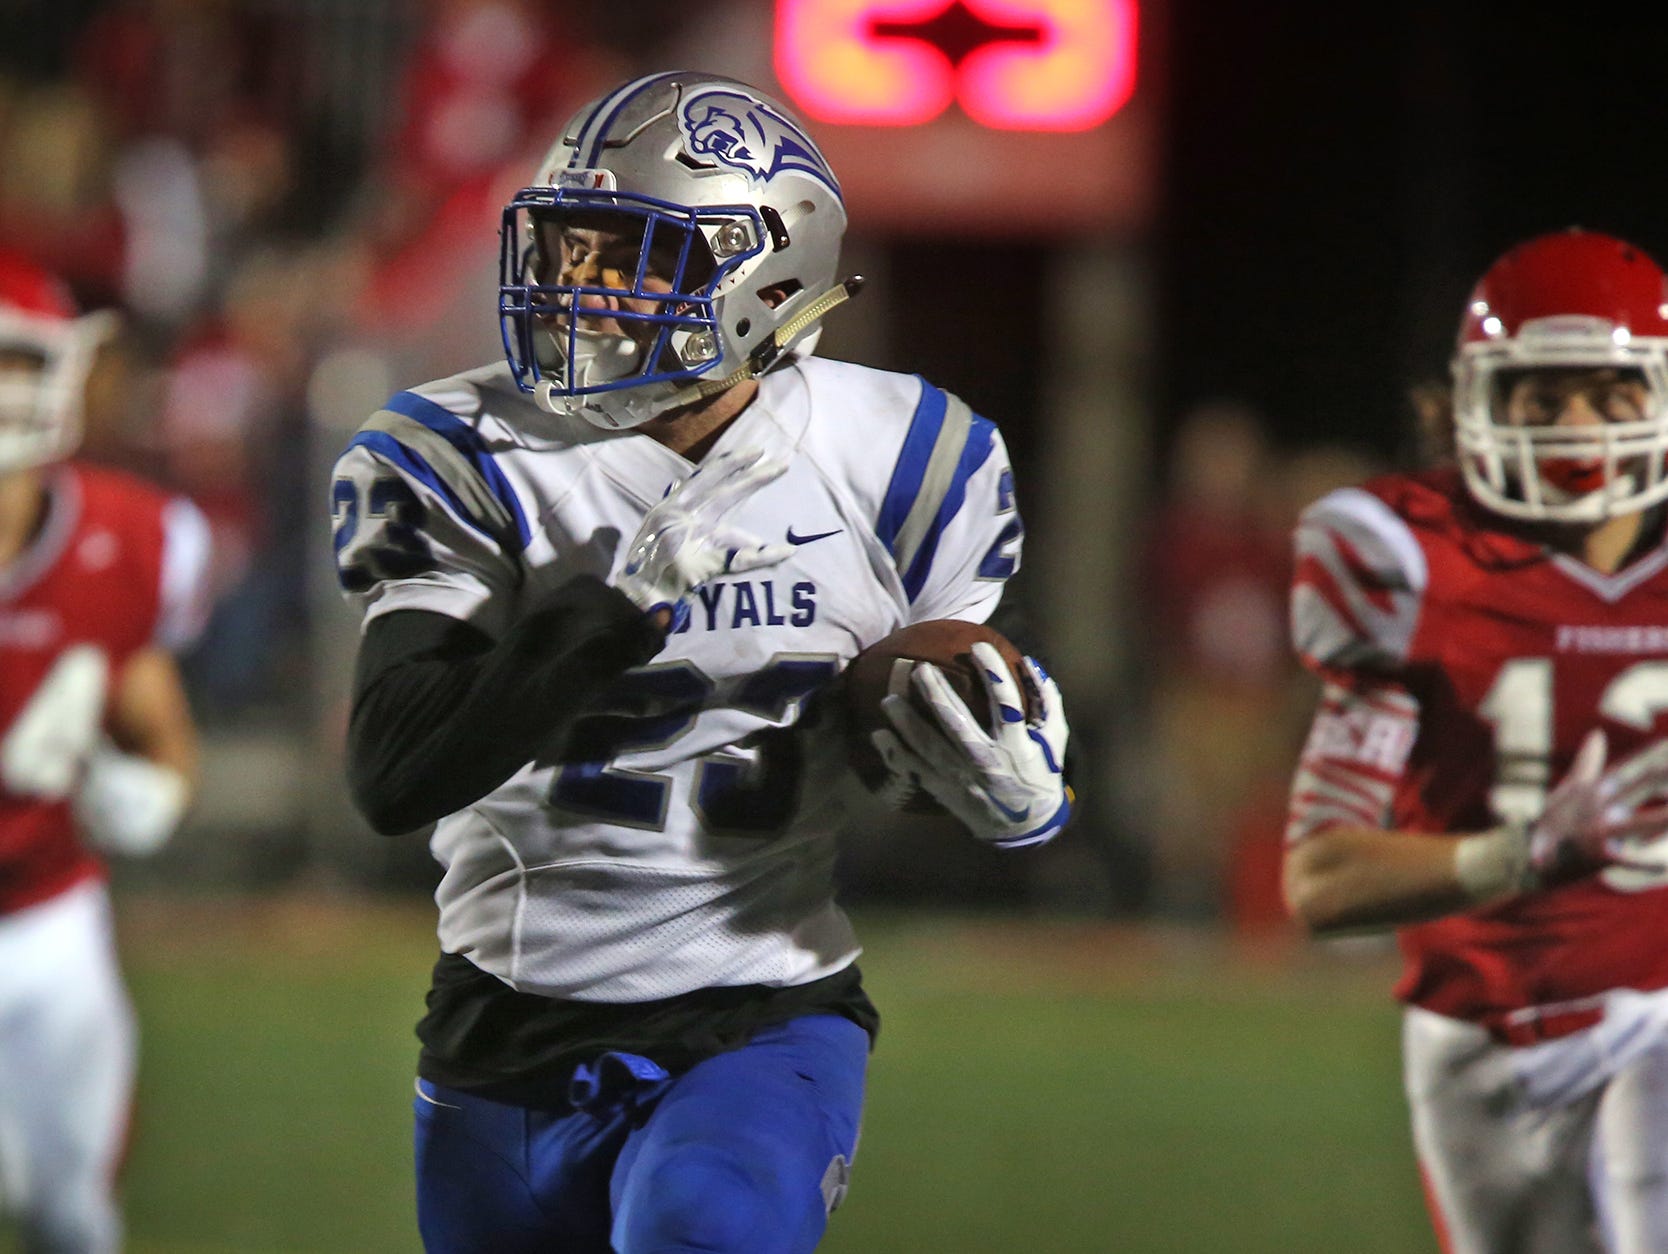 Hamilton Southeastern #23 Aaron Matio heads for the end zone during fourth quarter action of the Hamilton Southeastern at Fishers football game, Friday, September 11, 2015. Hamilton Southeastern won the game 39-33.